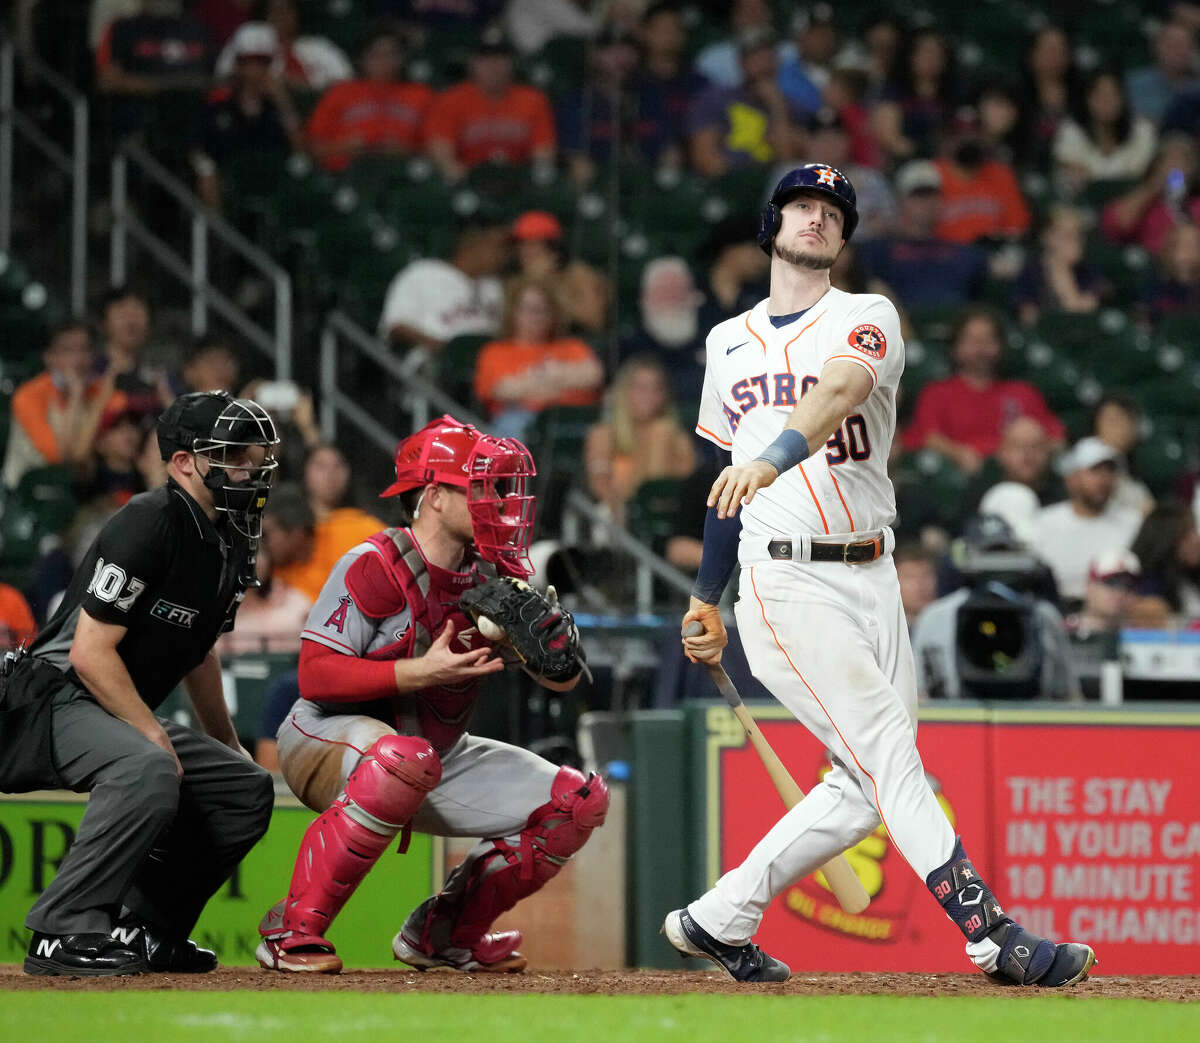 Astros offense gets going with quality at-bats in Game 4 win